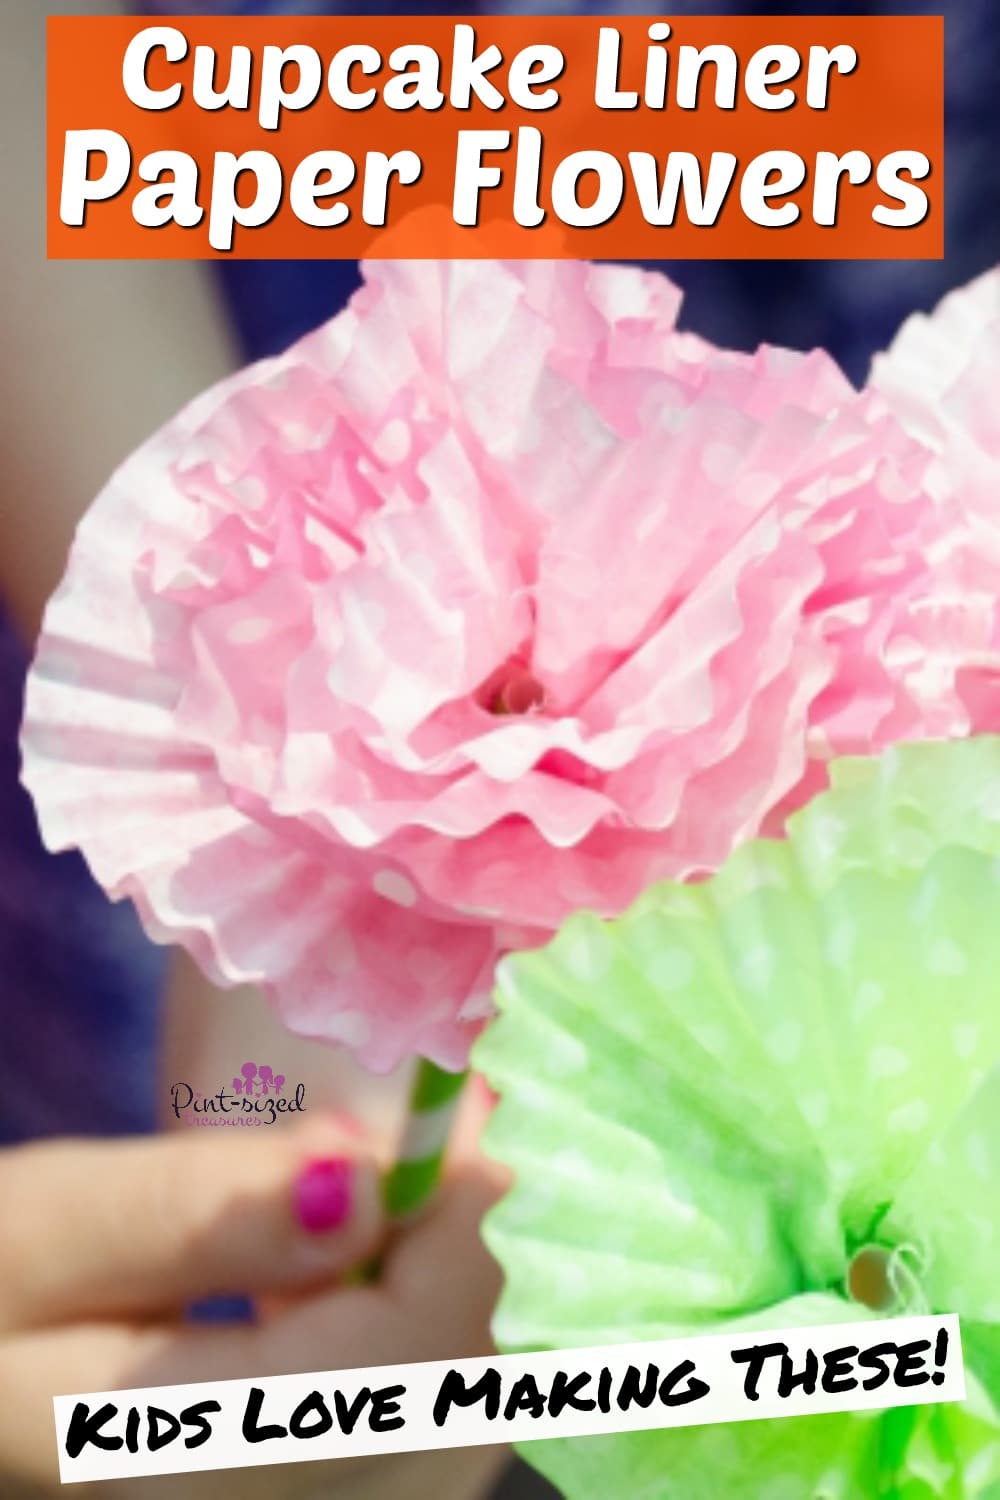 How to Make Paper Flowers From Cupcake Liners